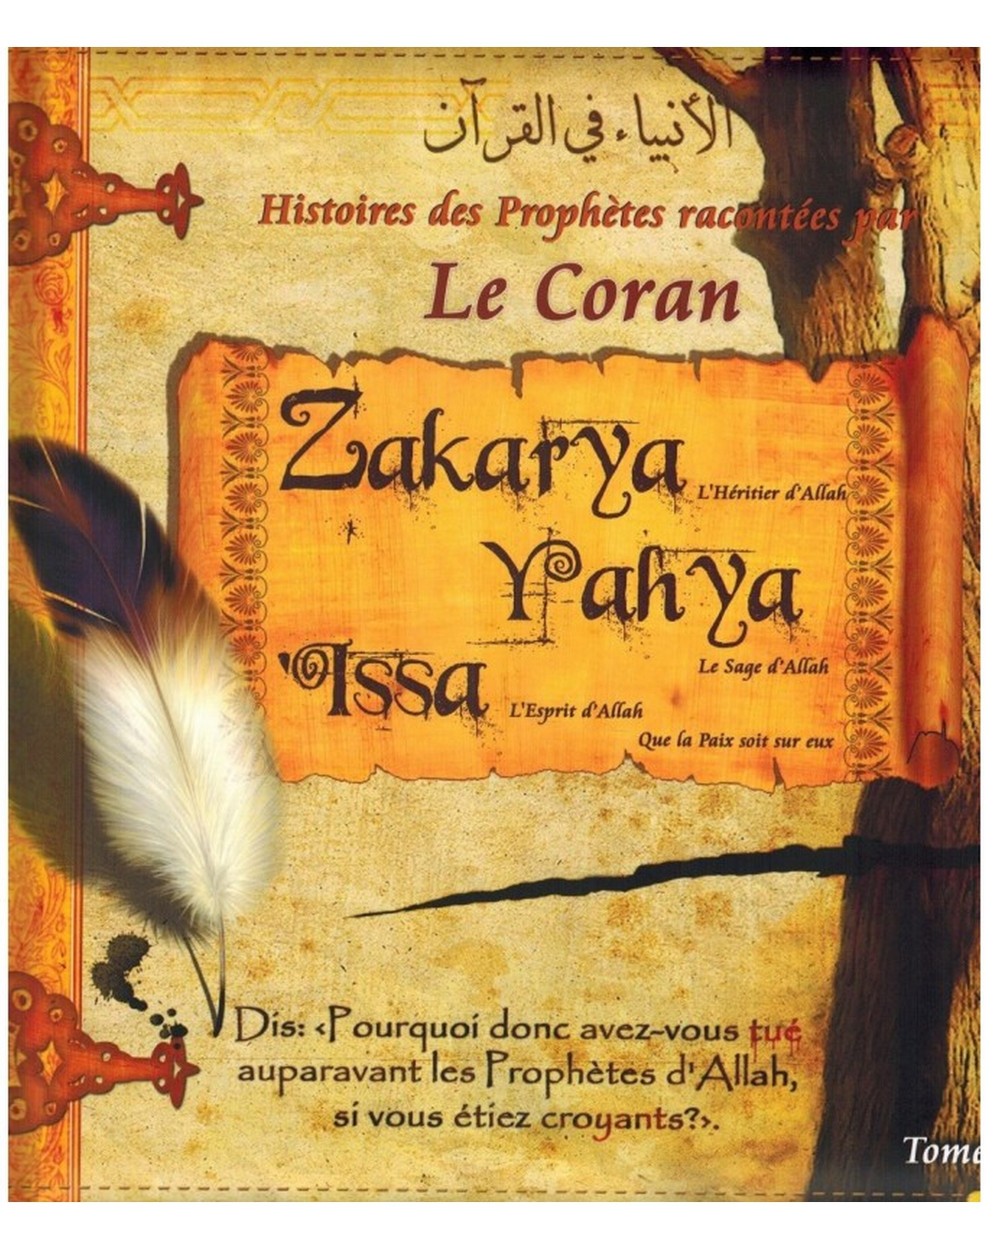 Stories of the prophets told by the Koran - Tome 8 (ZAKARYA, YAHYA, ISSA)